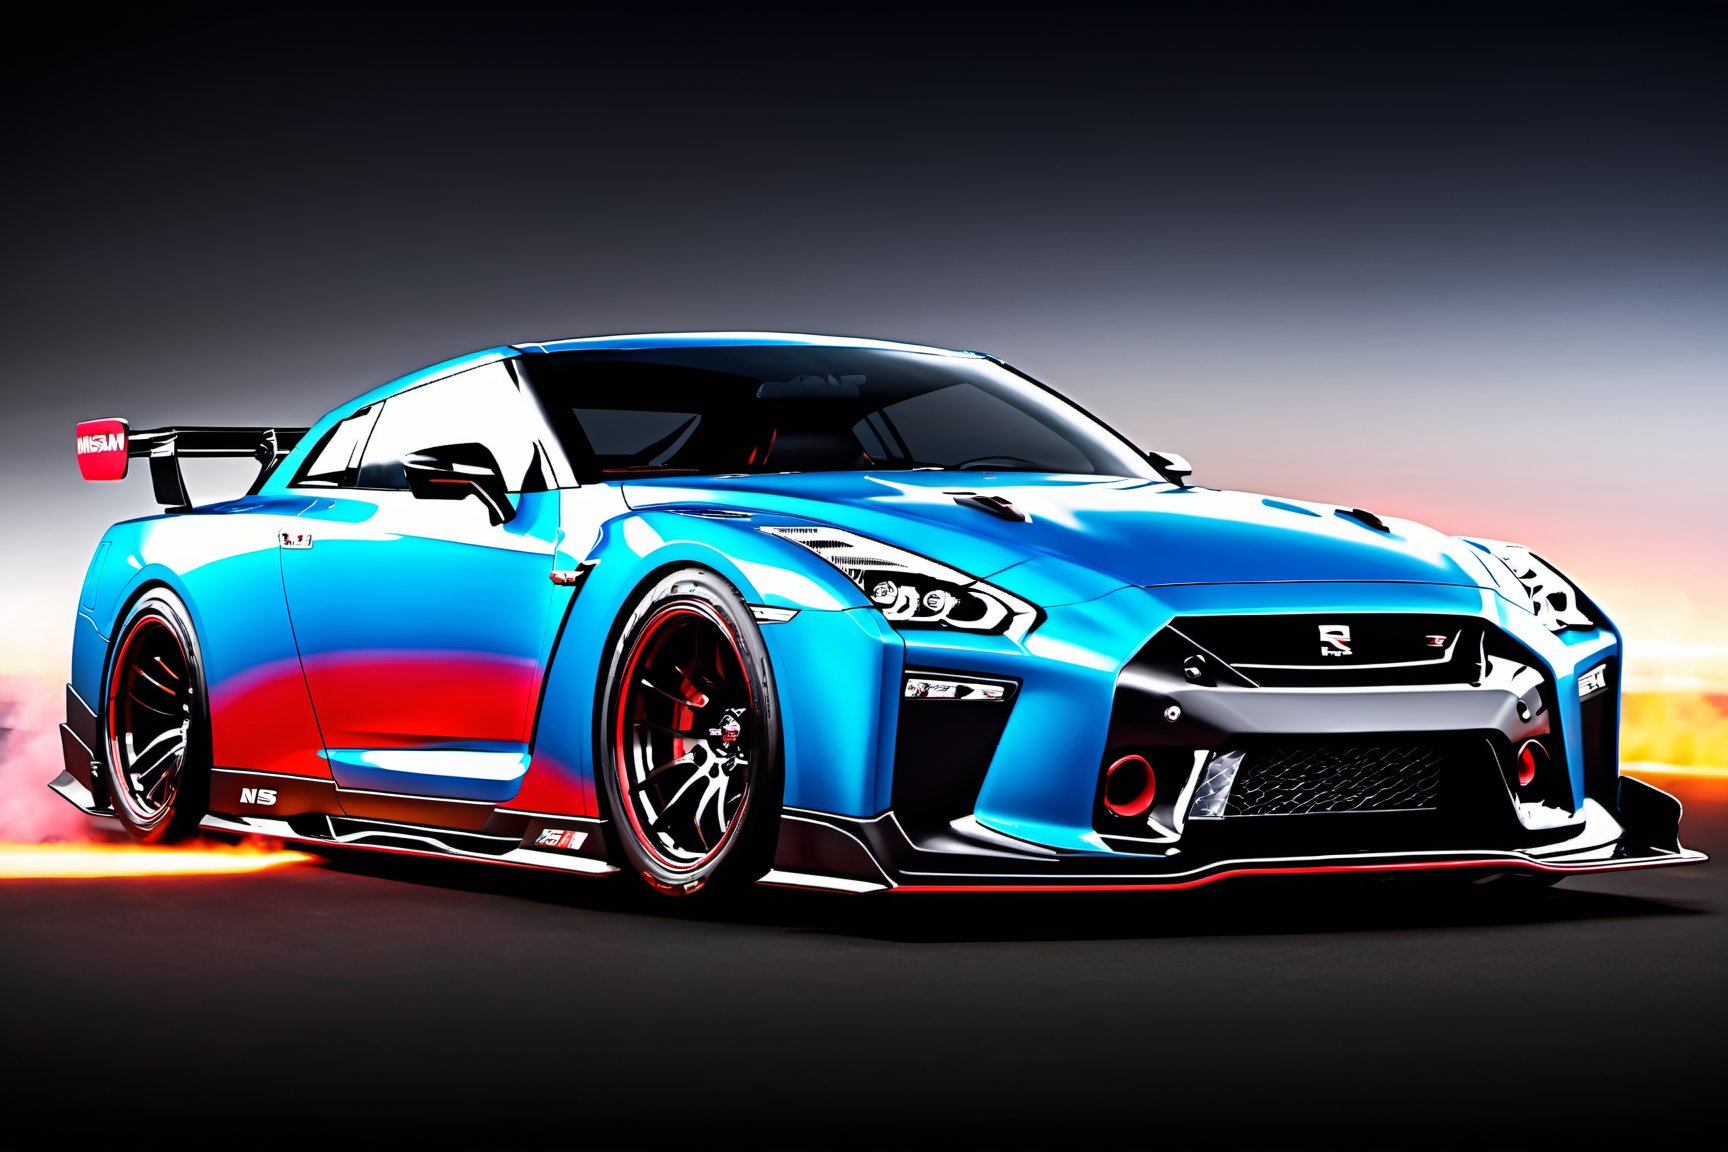 (((A photo realistic image of a Nissan GT-R Nismo 2023))), ((wide shot)) , sharp, detailed car body , detailed tires, (masterpiece, best quality, ultra-detailed, 8K), race car, street racing-inspired, Drifting inspired, LED, ((Twin headlights)), (((Bright neon color racing stripes))), (Black racing wheels), Wheel spin showing motion, Show car in motion, Burnout,  wide body kit, modified car,  racing livery, masterpiece, best quality, realistic, ultra high res, (((depth of field))), (full dual color neon lights:1.2), (hard dual color lighting:1.4), (detailed background), (masterpiece:1.2), (ultra detailed), (best quality), intricate, comprehensive cinematic, magical photography, (gradients), glossy, Fast action style, Sideways drifting in to a turns, ,c_car,fire element